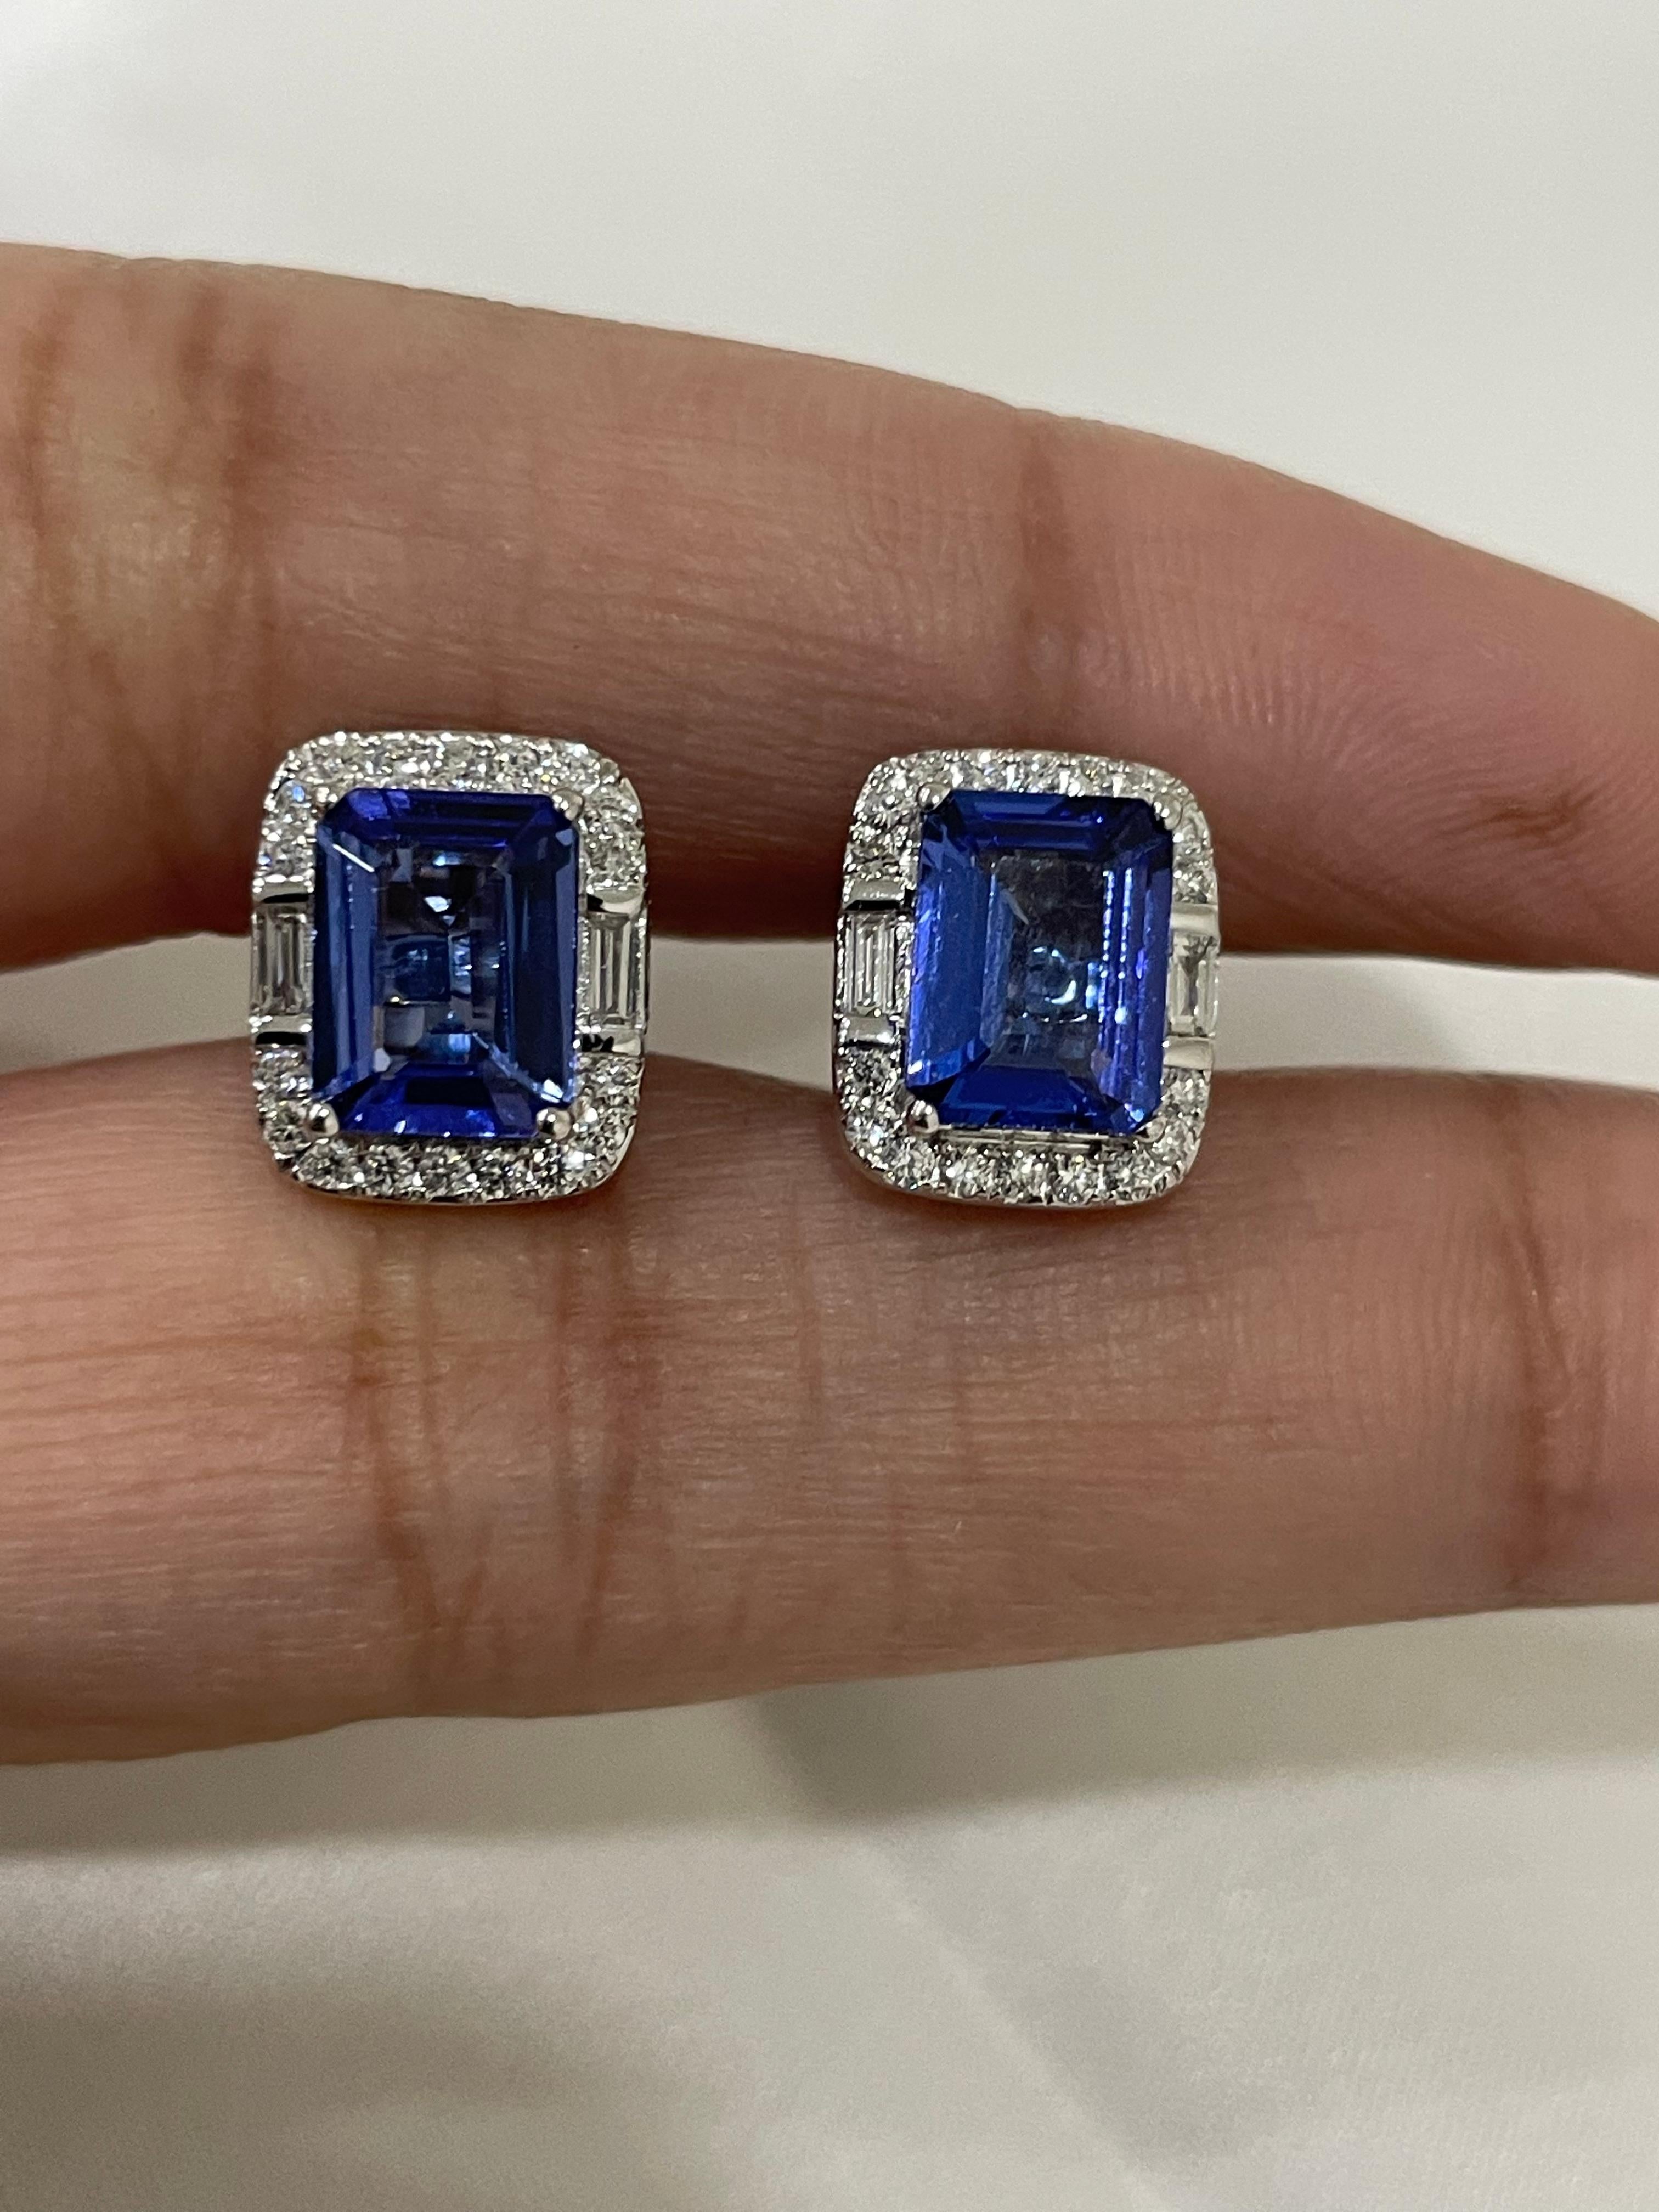 Studs create a subtle beauty while showcasing the colors of the natural precious gemstones and illuminating diamonds making a statement.

Octagon cut tanzanite studs with diamonds in 18K gold. Embrace your look with these stunning pair of earrings